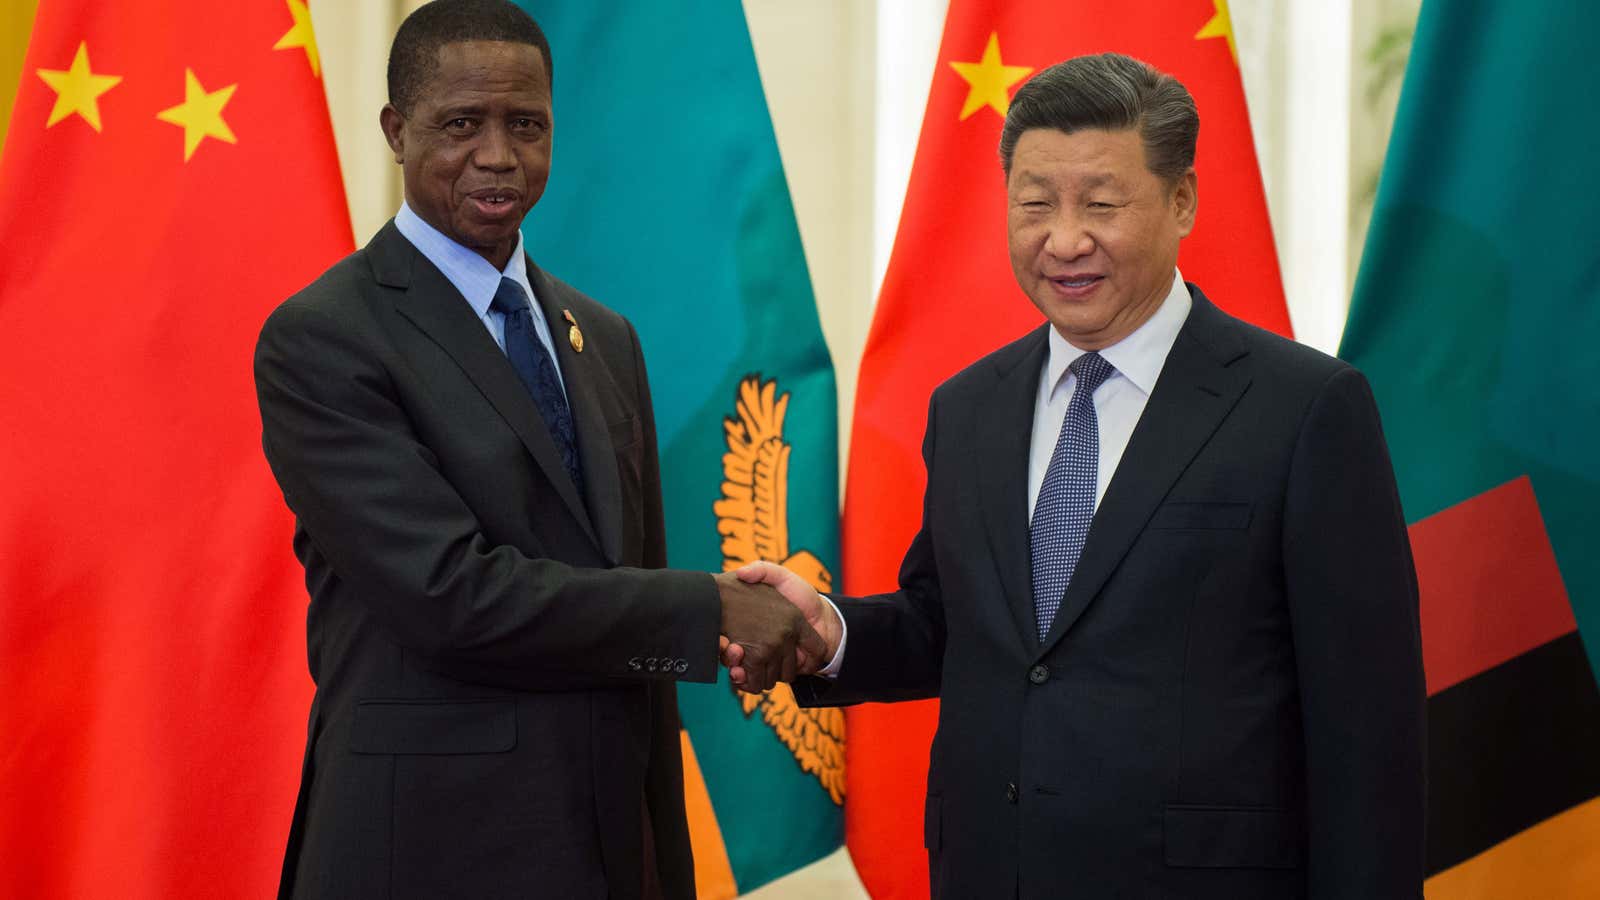 Zambia’s President Edgar Lungu with China’s President Xi Jinping in Beijing, China Sept 1, 2018.